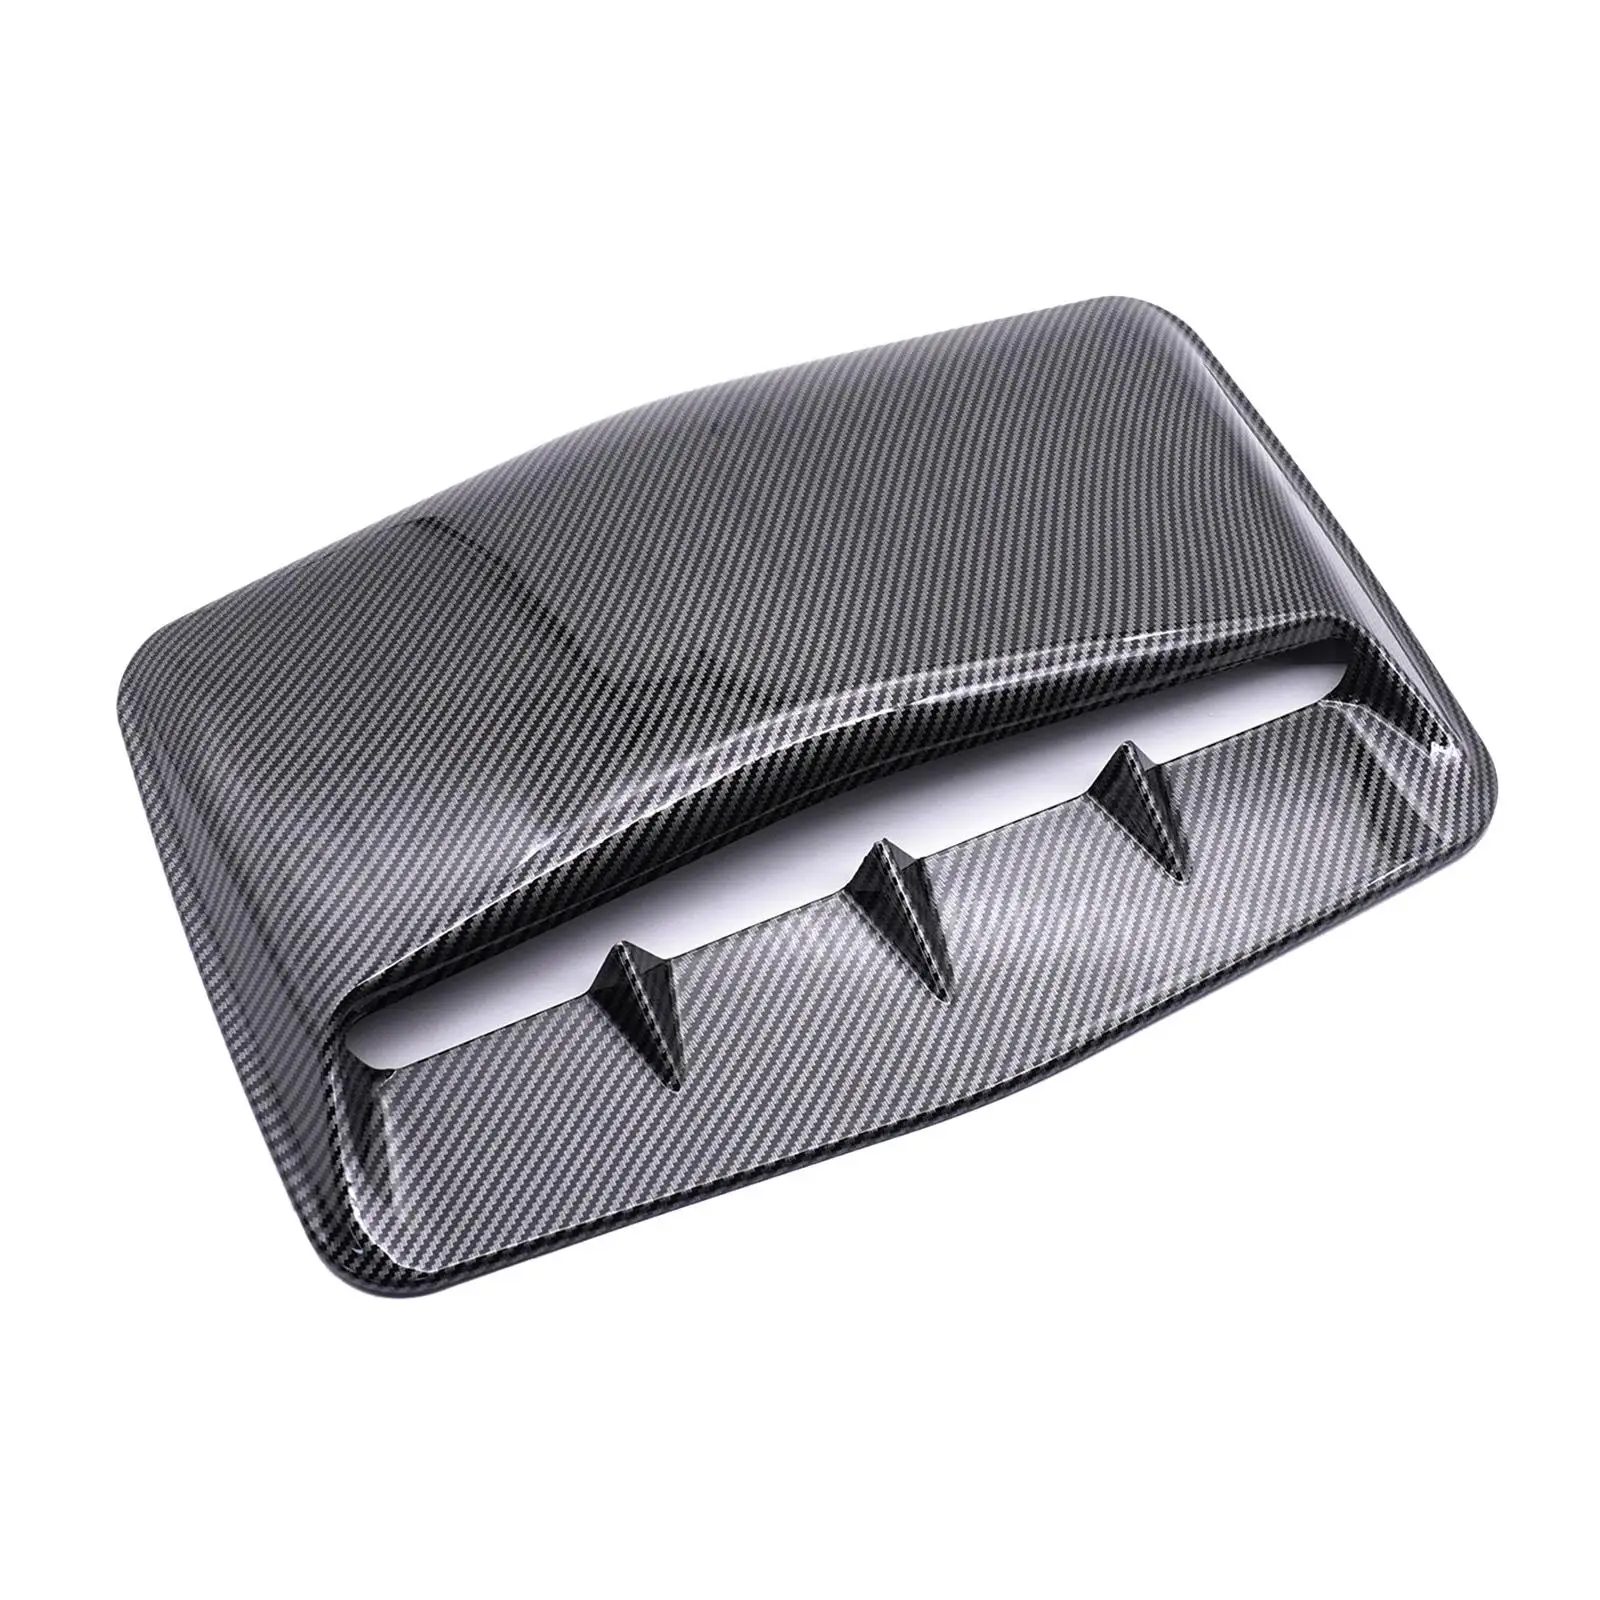     Intake Cover Bonnet Air Outlet  for Car Modification Accessories  Decoration